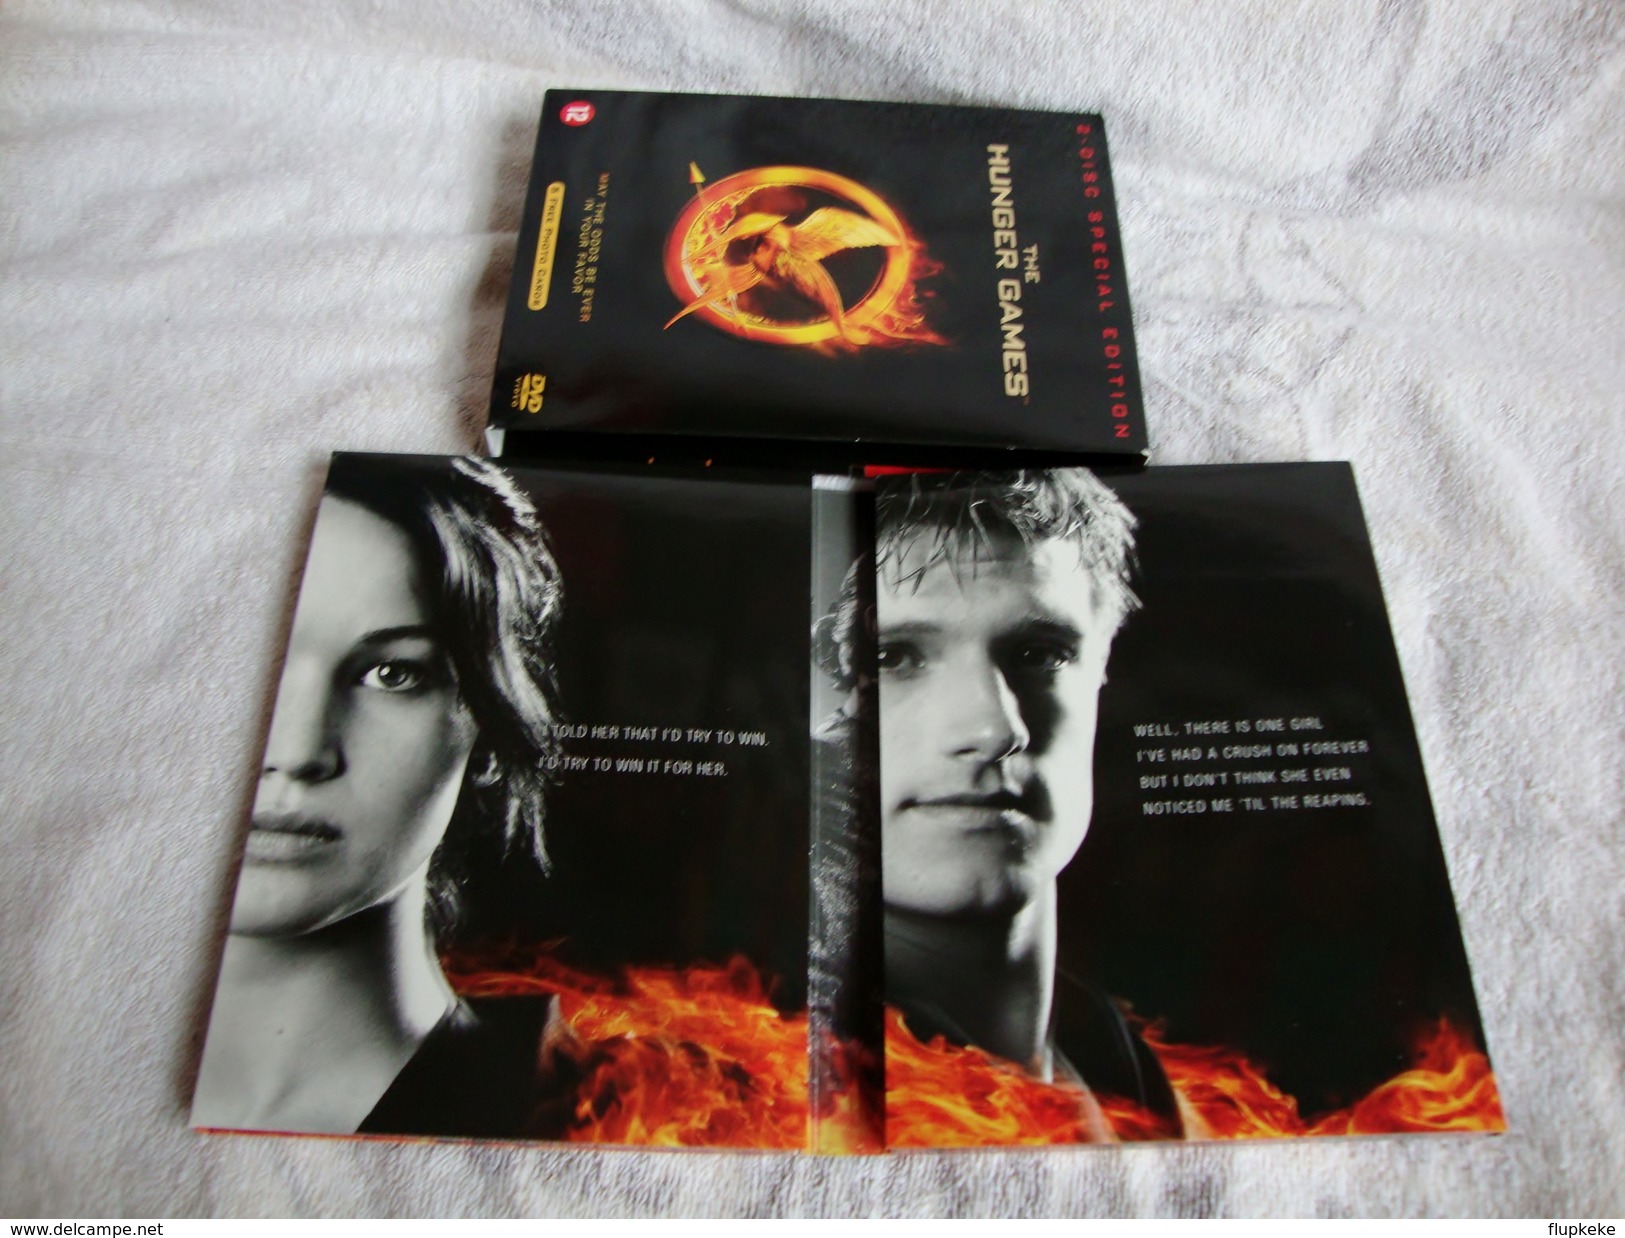 Dvd Zone 2 Hunger Games (2012) 2 DVD Édition Spéciale Collector The Hunger Games Vf+Vostfr - Science-Fiction & Fantasy